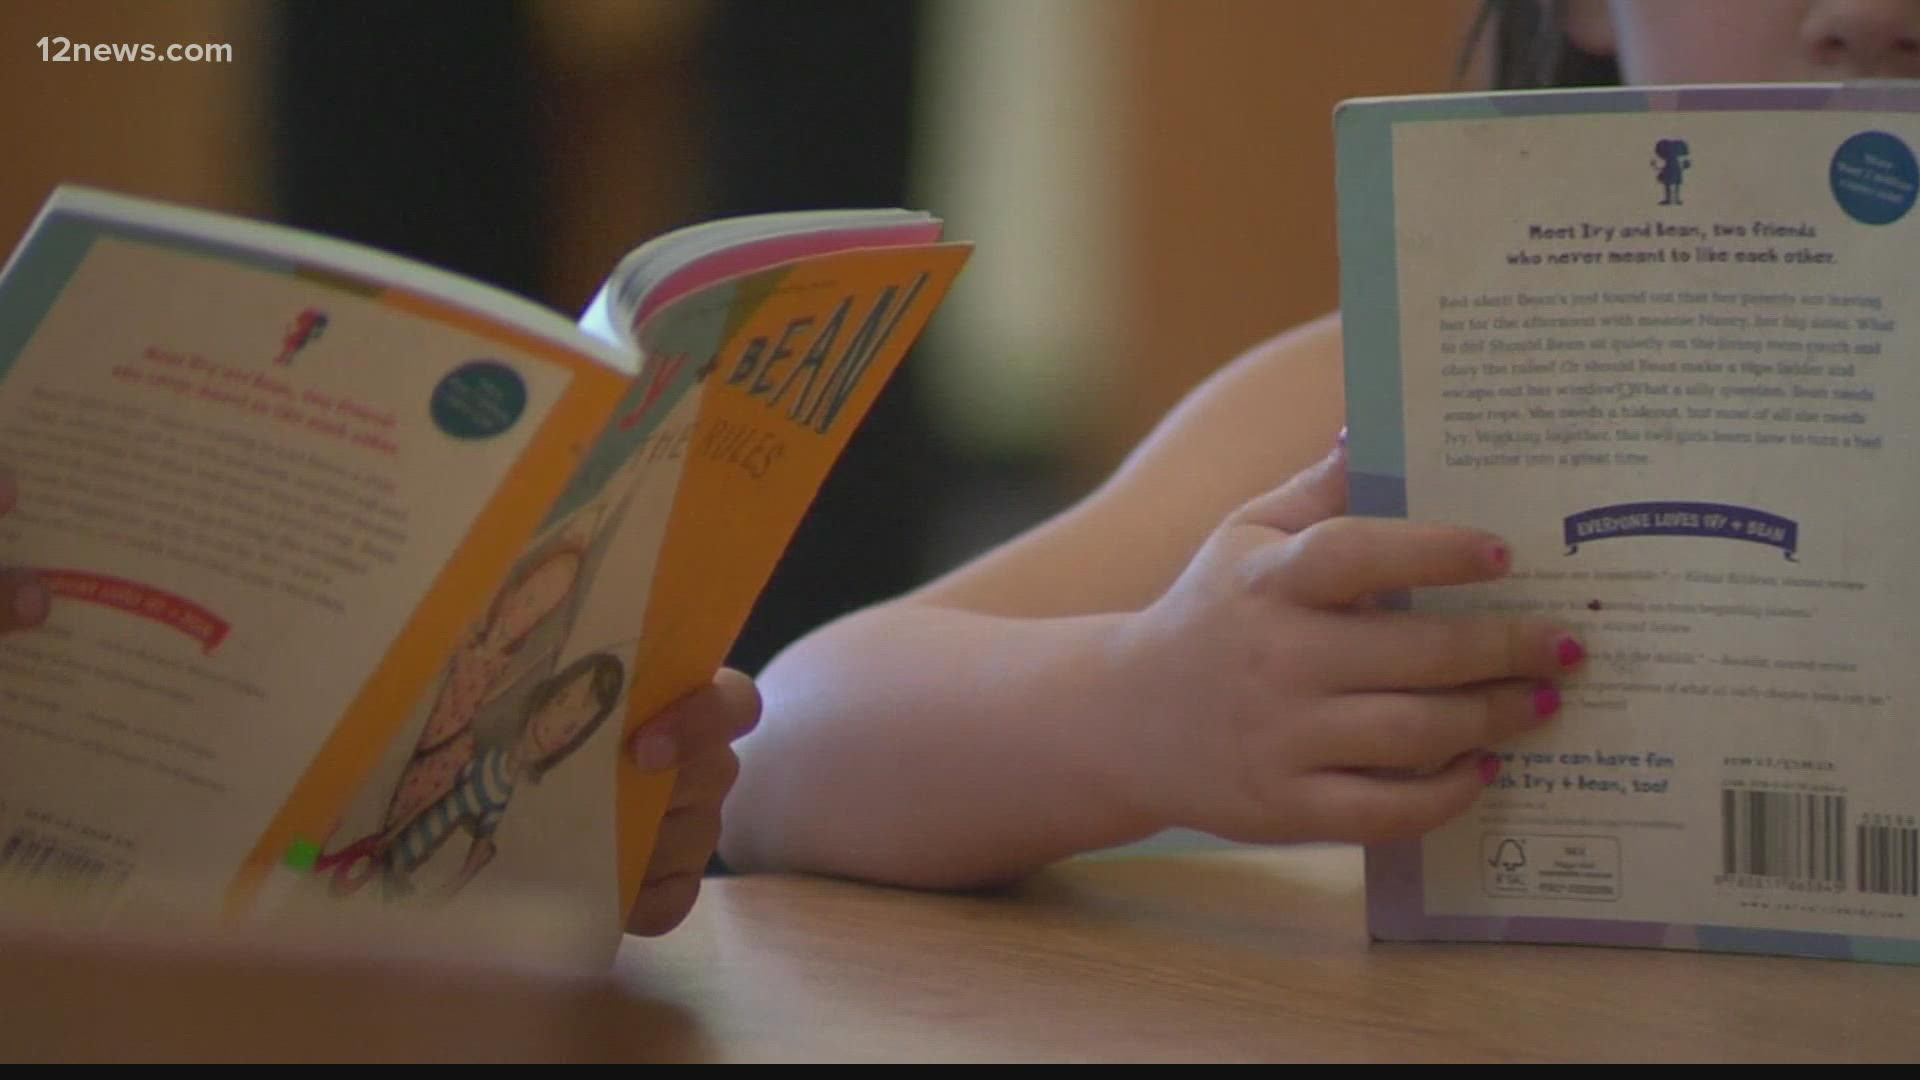 60% of students in the state cannot read at their grade level, Stand for Children Arizona research shows.